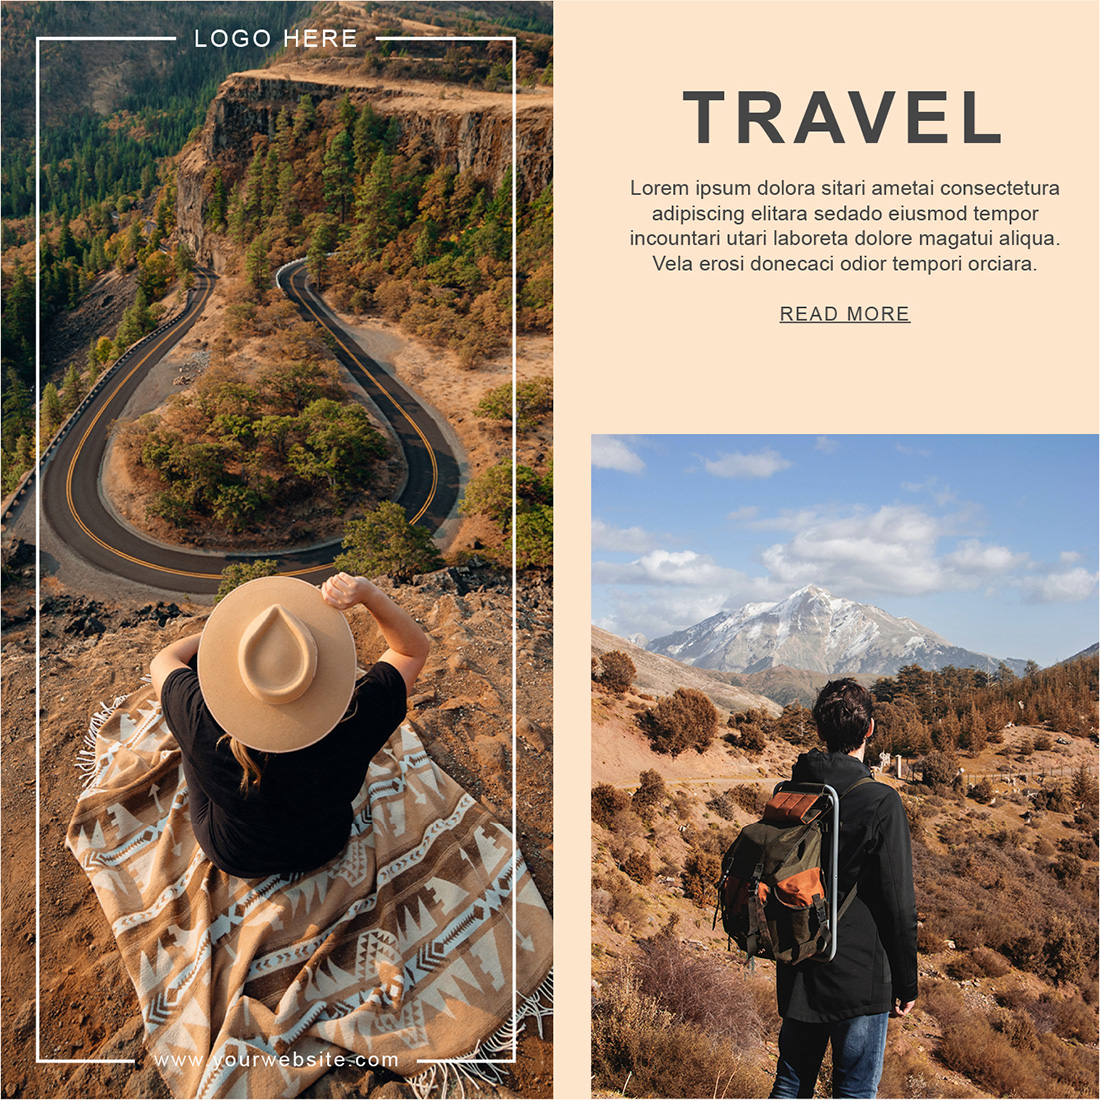 Travelling Theme Social Media Post Templates for your instagram.